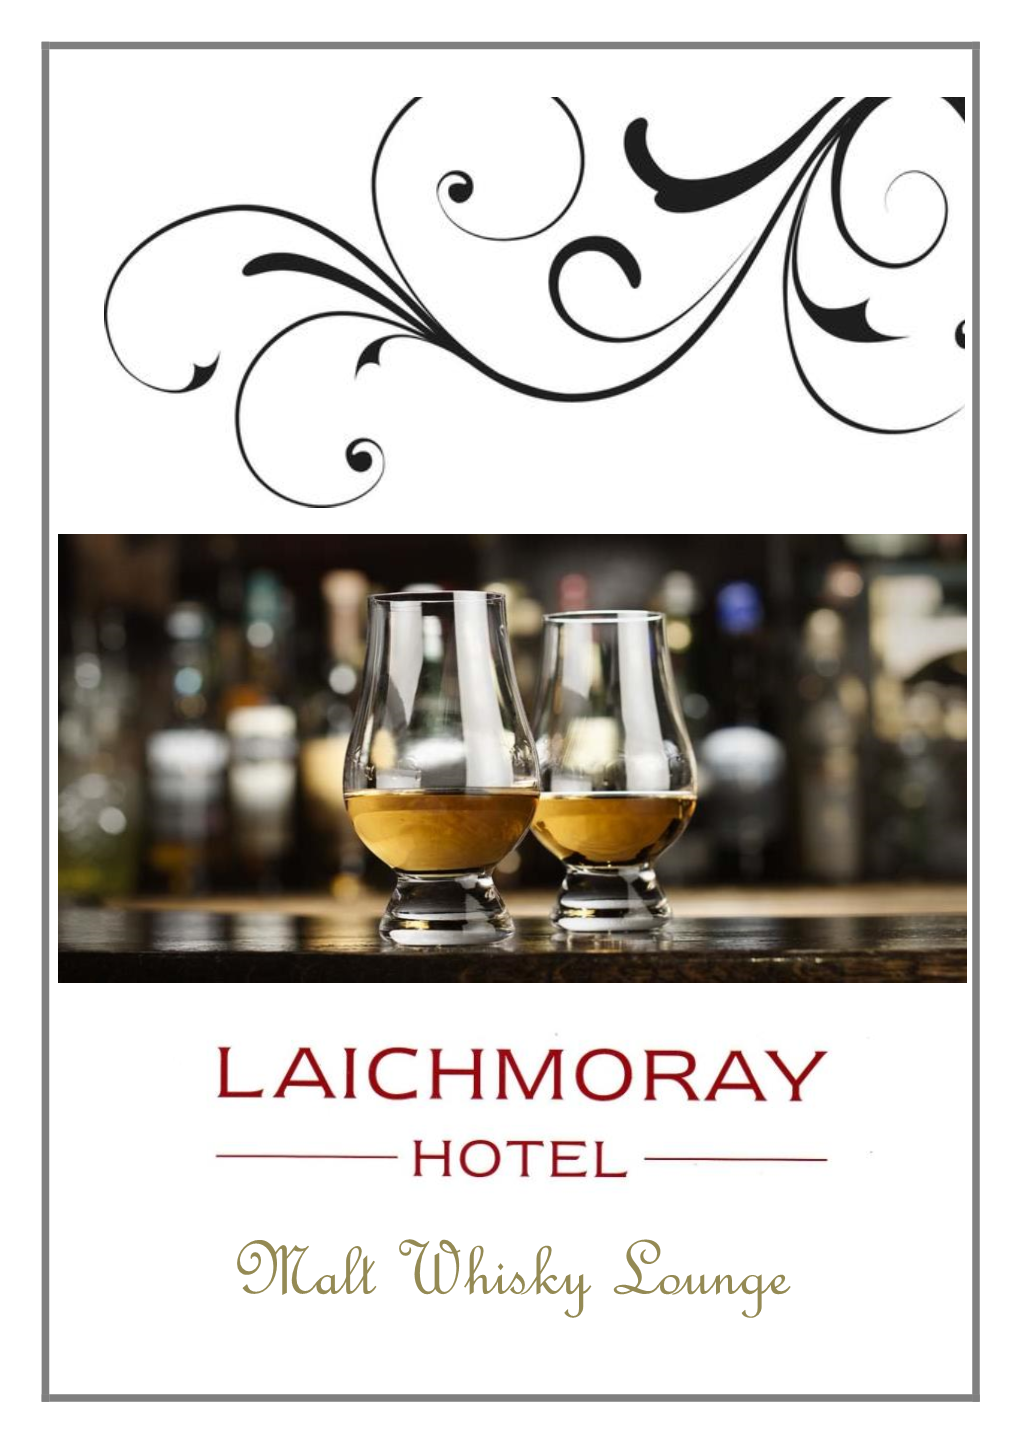 Malt Whisky Lounge Welcome to the Laichmoray